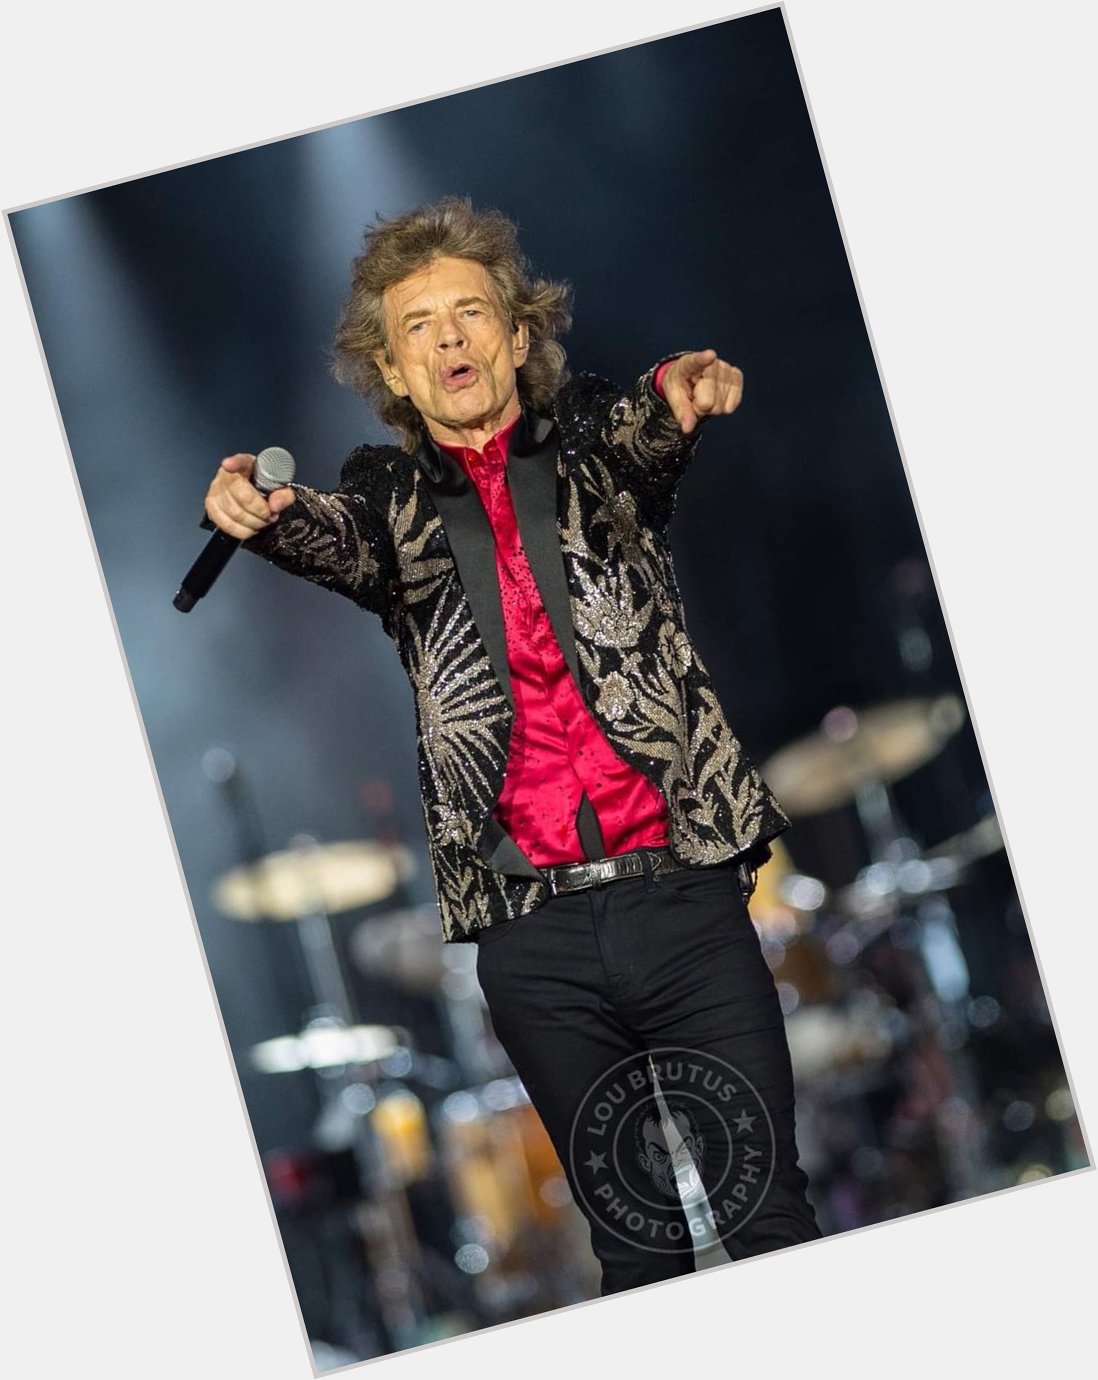 Happy Birthday to Mick Jagger of The Rolling Stones!   